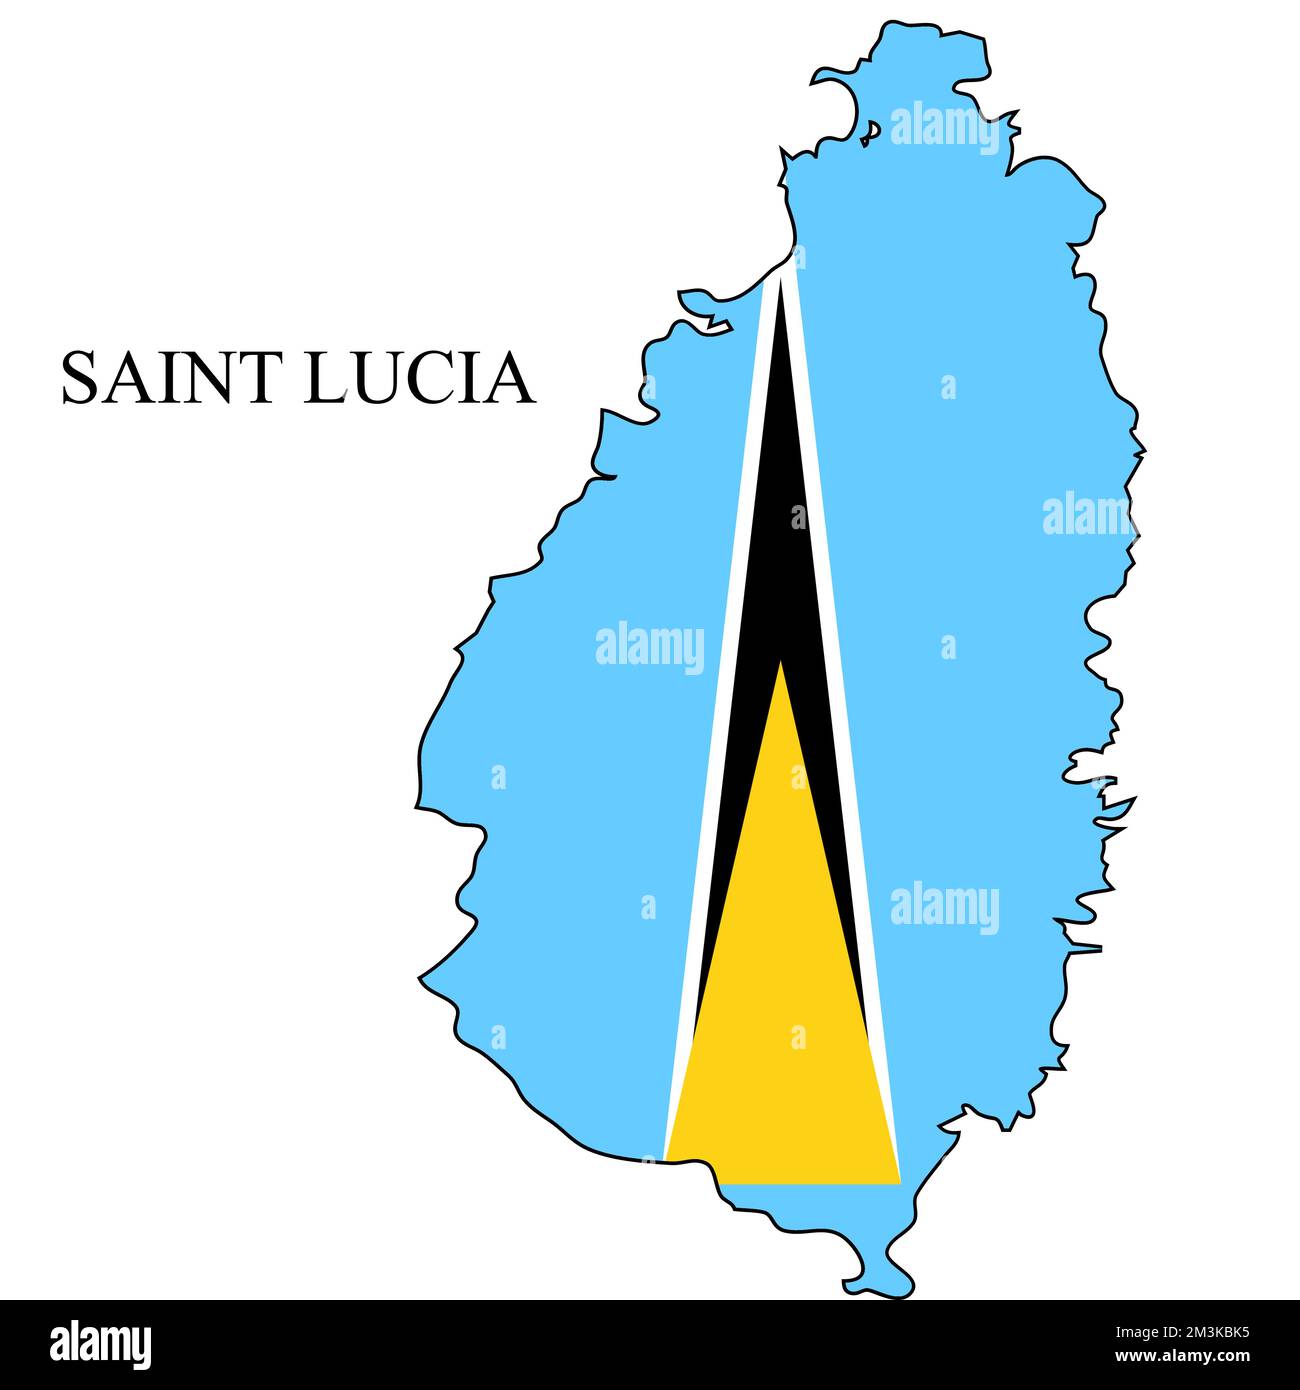 St Lucia map vector illustration. Global economy. Famous country. Caribbean. Latin America. America. Stock Vector